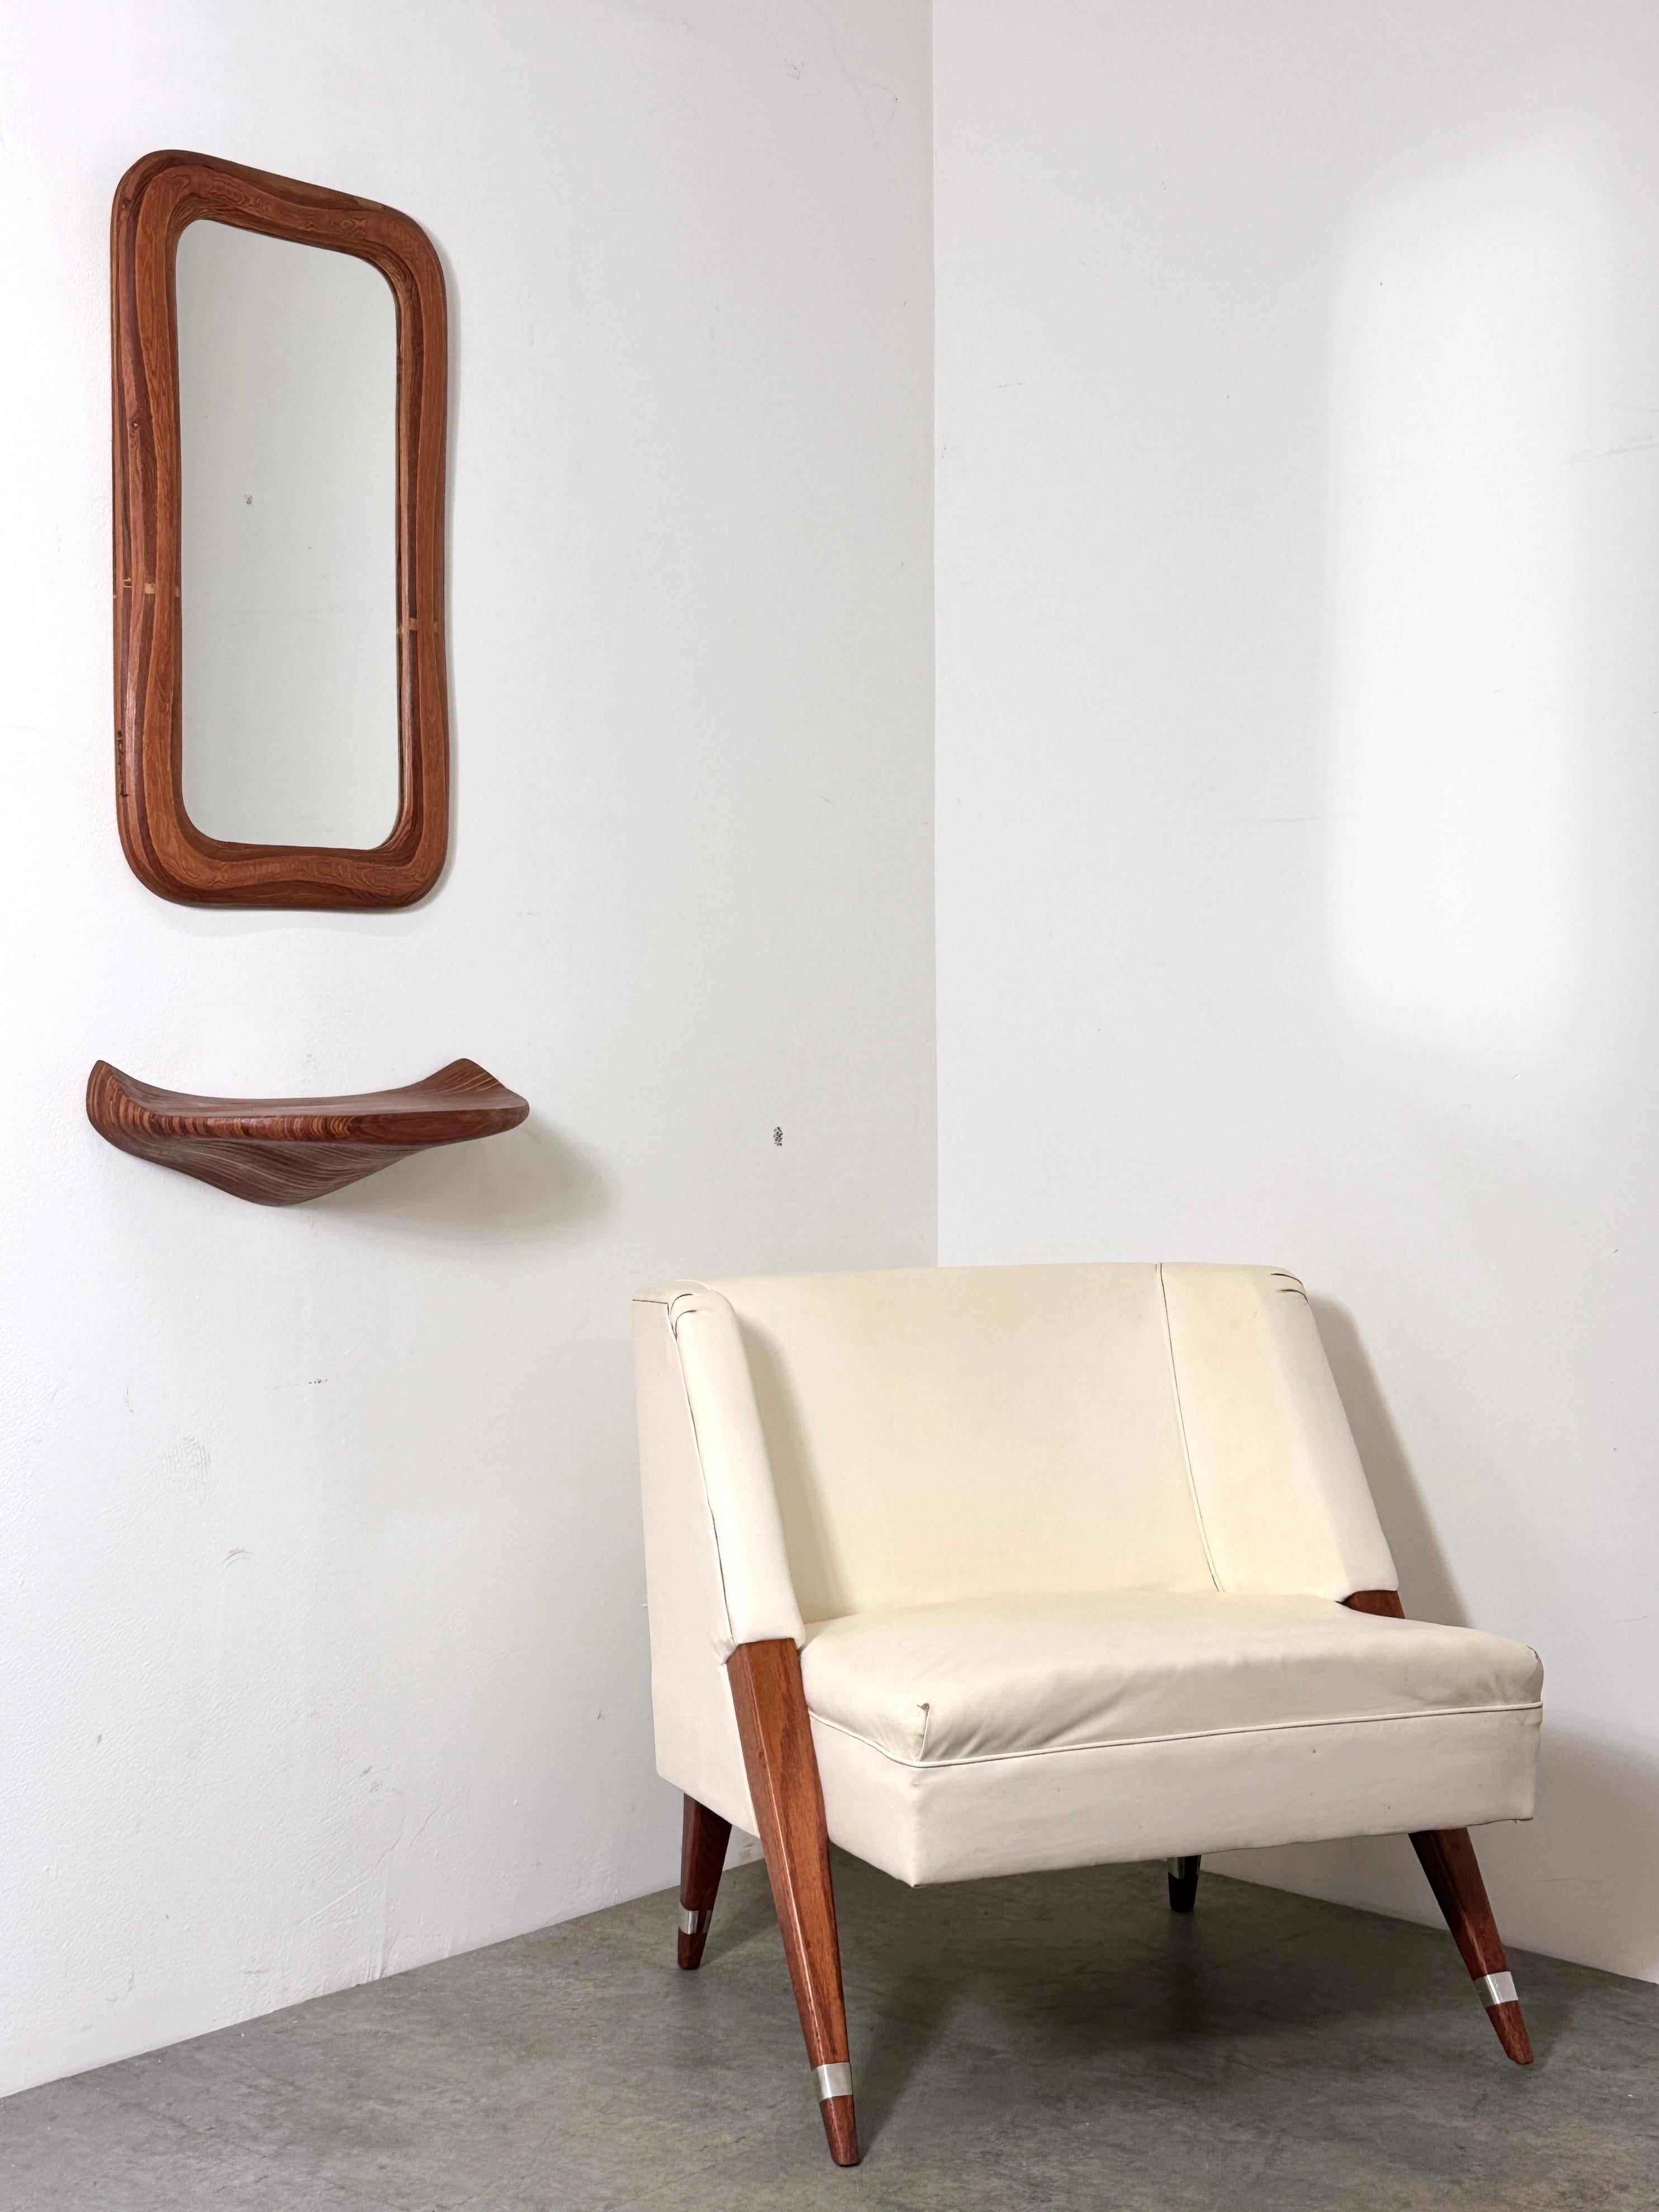 Sculptural wall mirror and floating shelf by American craftsman Robert Hargrave 

Stack laminate construction in Pine sculpted into an organic design
Perfect for an entry or hallway

Both pieces signed and dated 1979

Mirror:
15 inch width 
27 inch